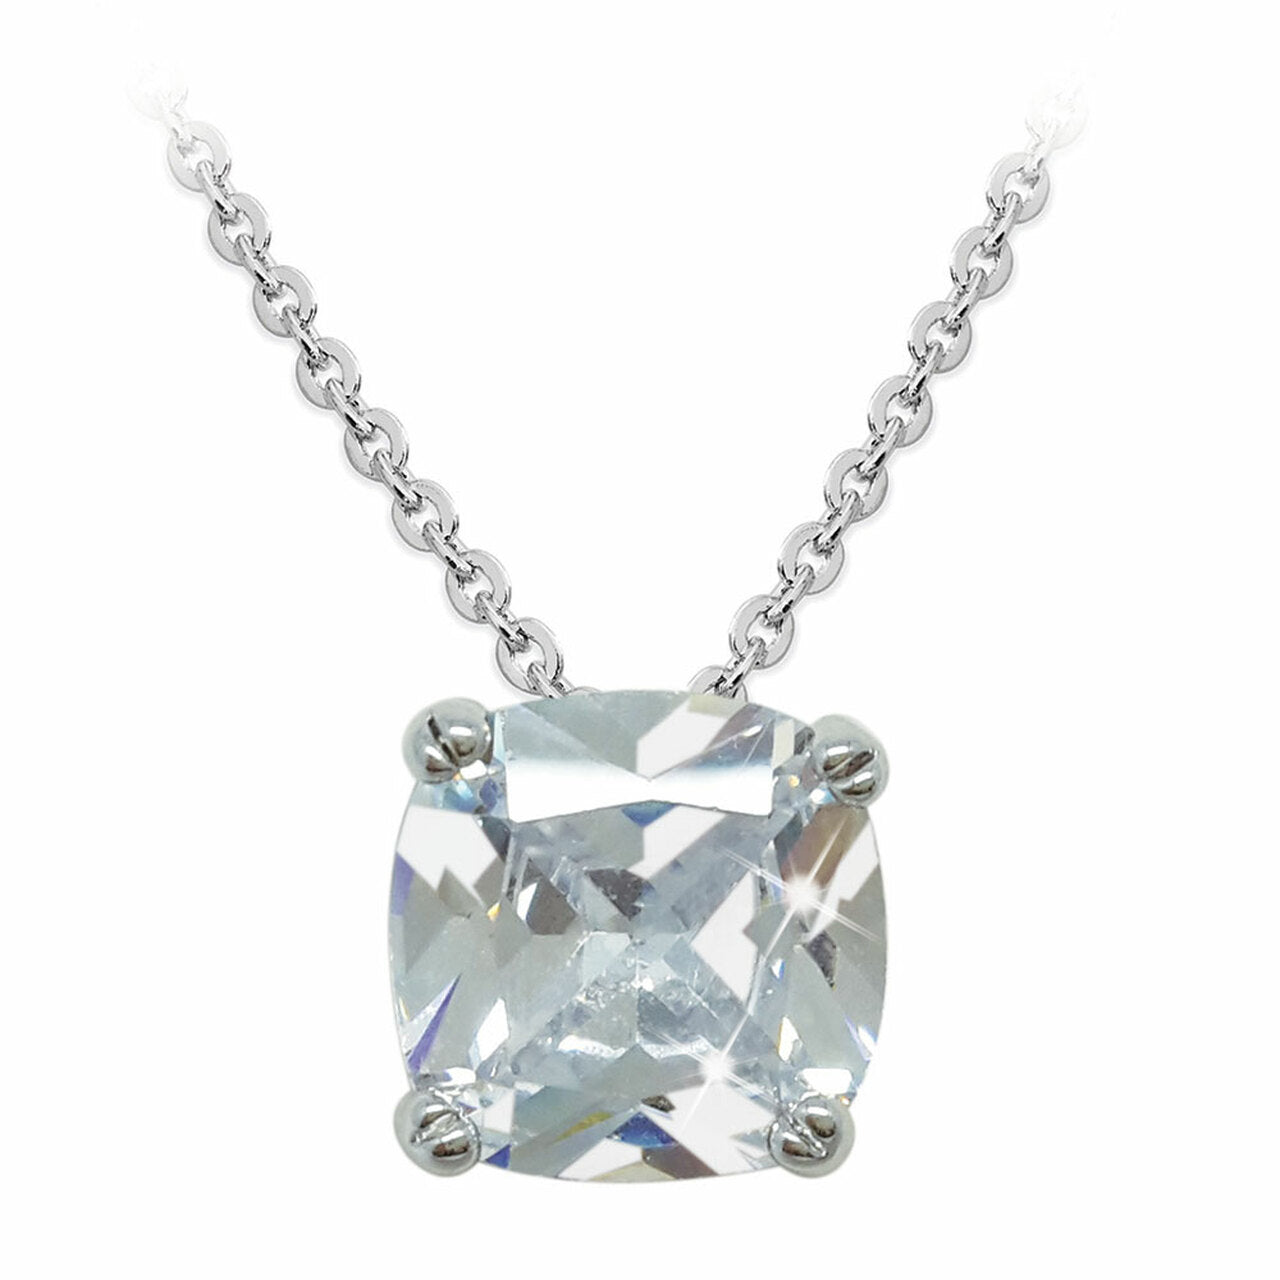 Silver Square Drop Pendant With Clear Stone by Tipperary  Darling and elegant, this simple pendant is truly enchanting. Crafted in cool silver, the sparkling princess-cut solitaire pendant glistens in it’s sleek four prong setting.